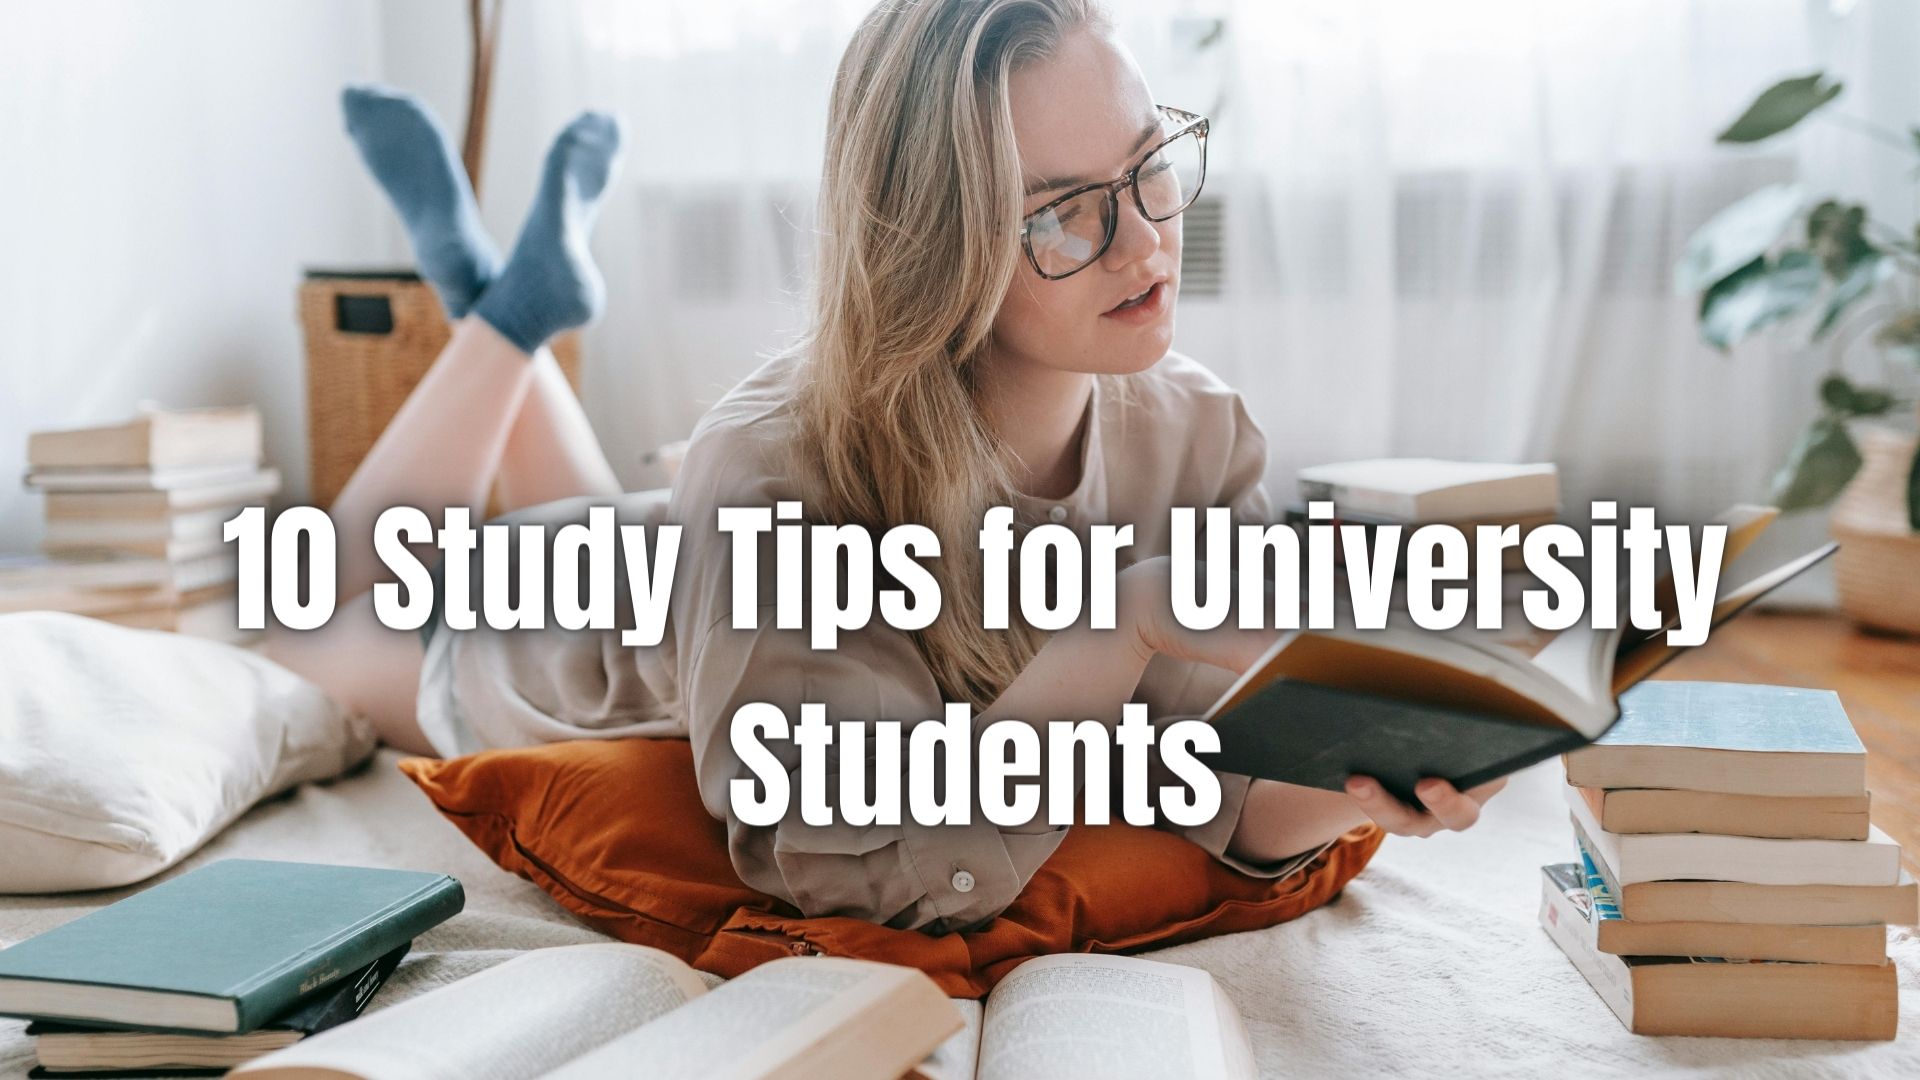 Feeling overwhelmed by college? Master your workload and ace your exams with our 10 essential study tips for new university students!